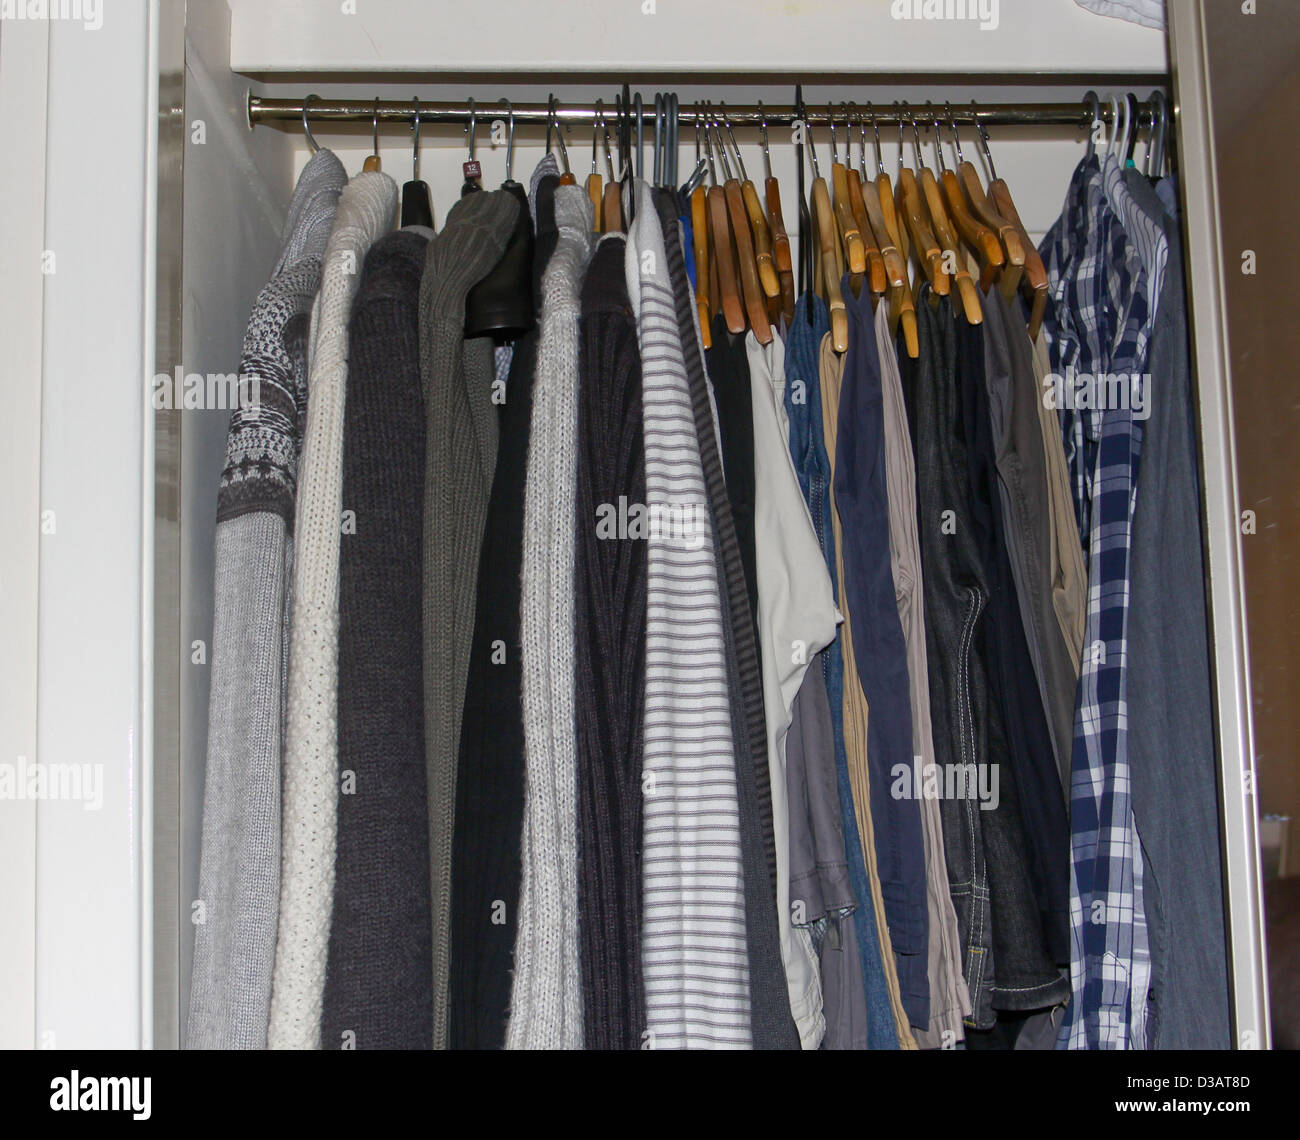 Mens Jumpers trousers and shirts hanging in wardrobe Stock Photo